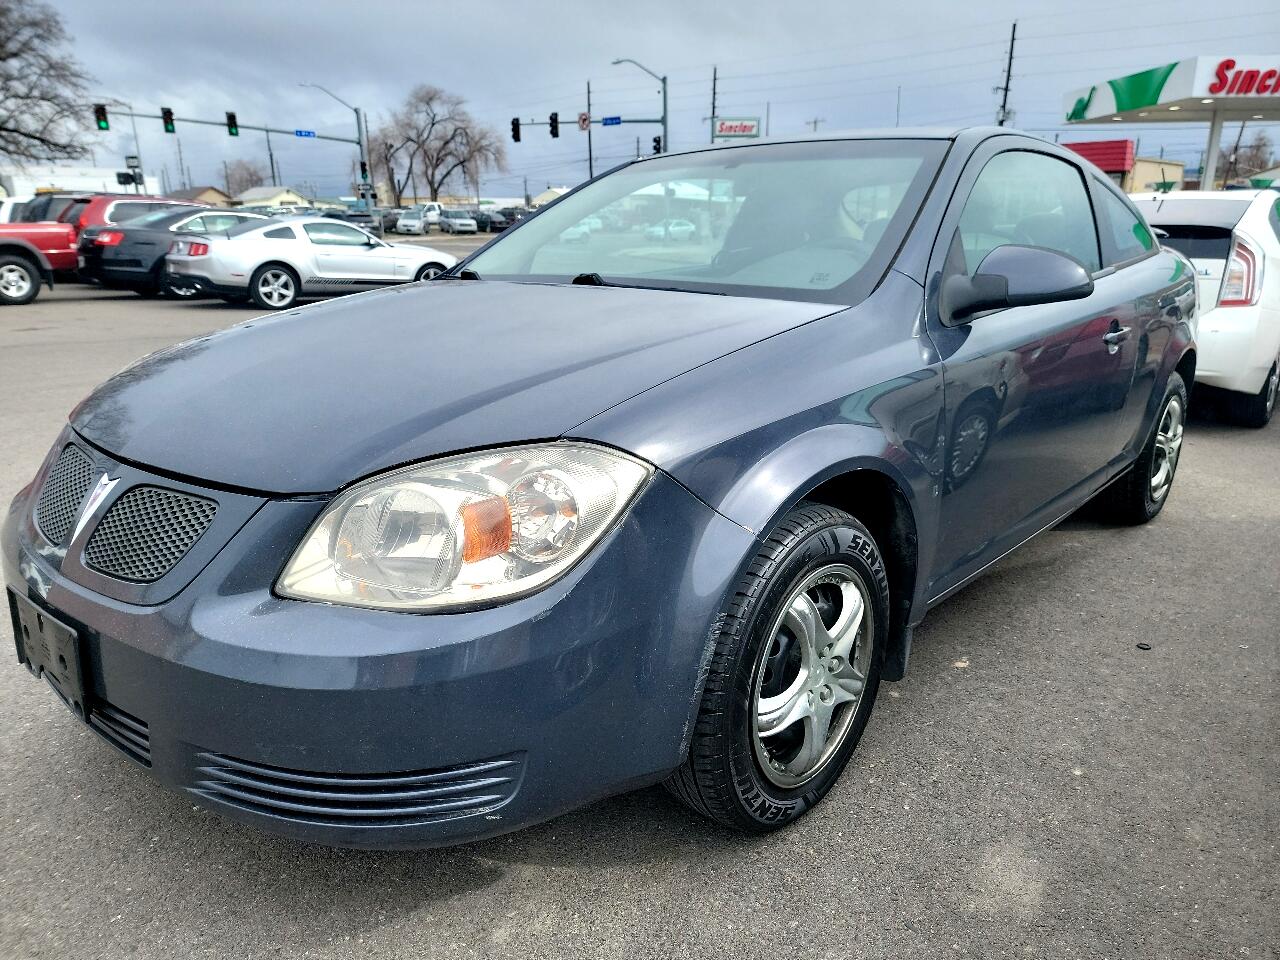 Used 2008 Pontiac G5 2dr Cpe for Sale in Grand Junction CO 81501 Clark Auto  Company